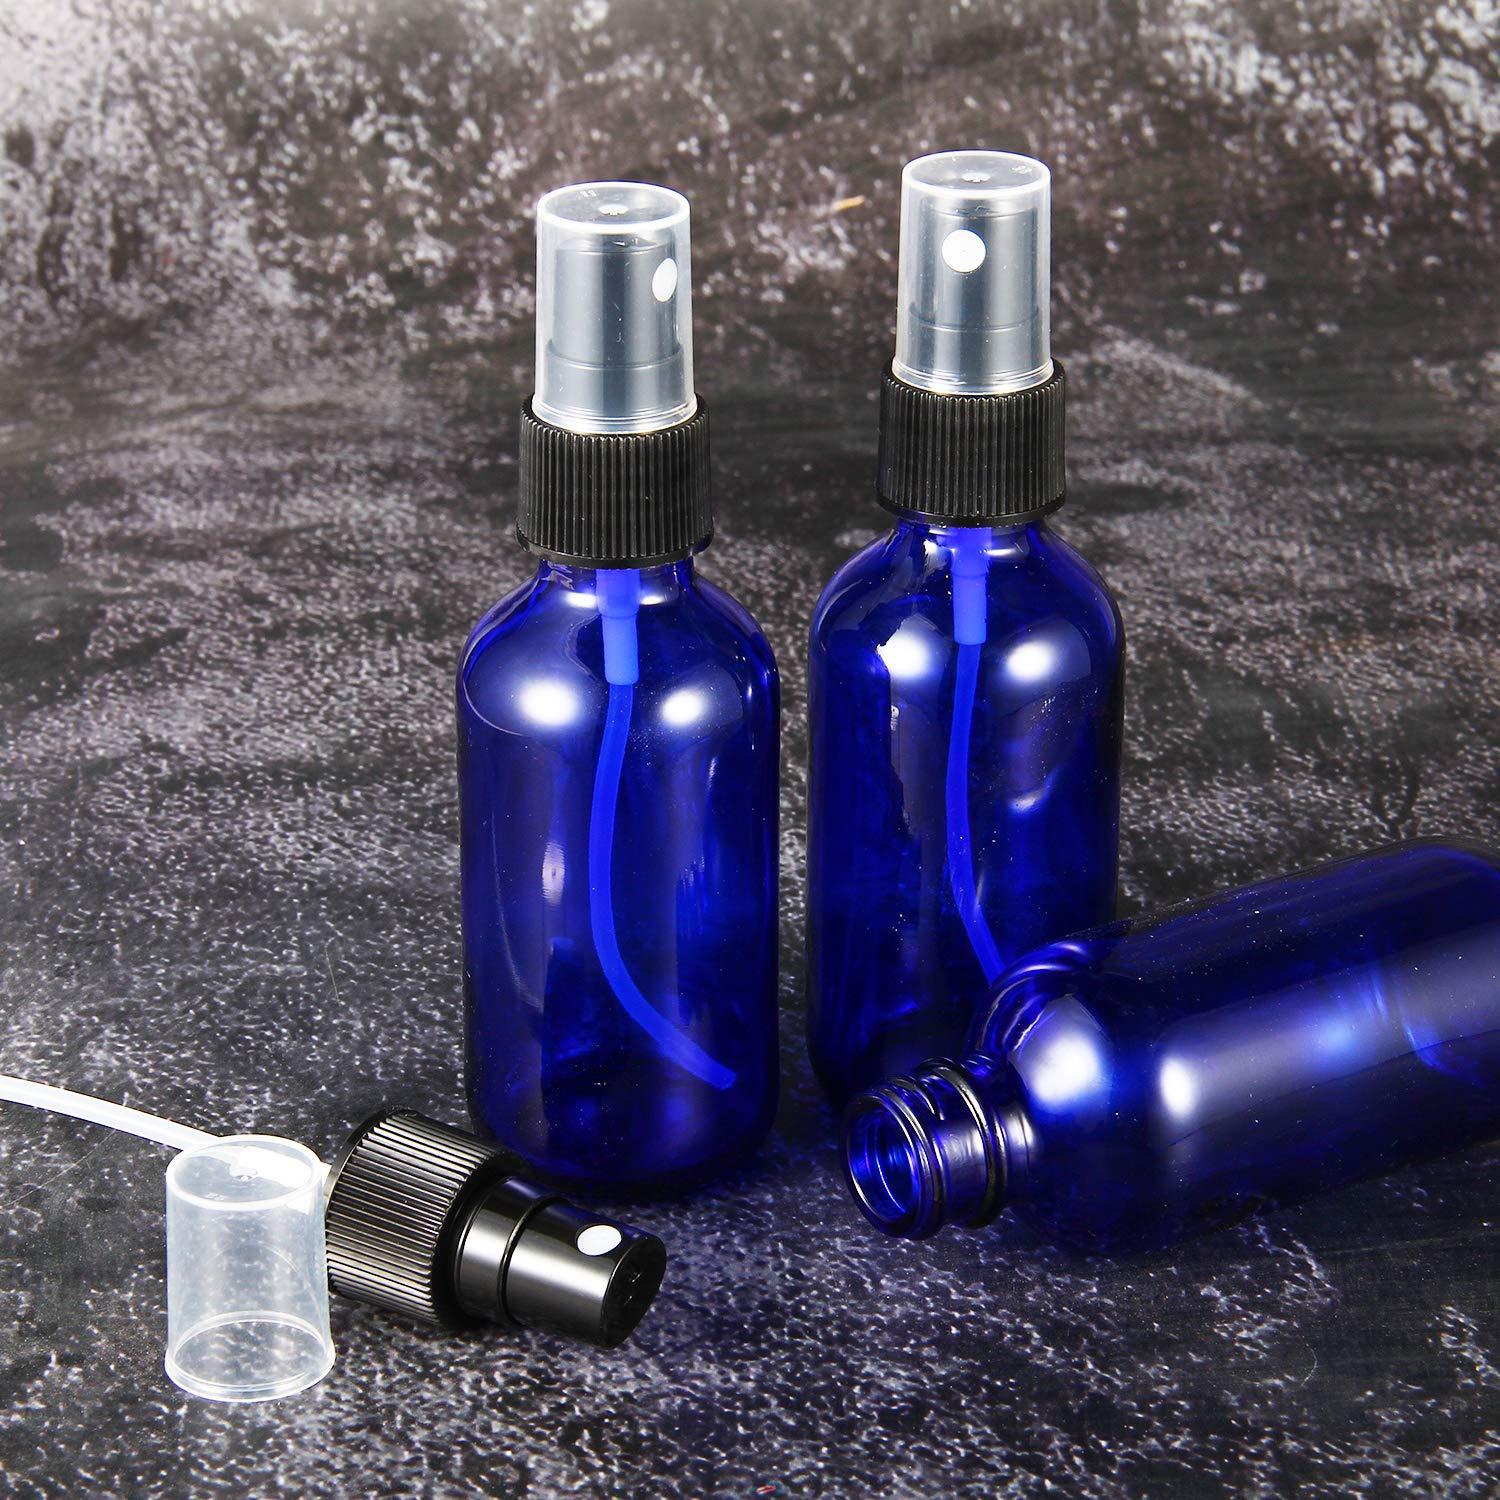 30 Pack 2 Oz Blue Glass Eye Dropper Bottles with 6 Funnels for Essential  Oils, Travel Aromatherapy Perfume, Liquid Cosmetics (36 Pieces)